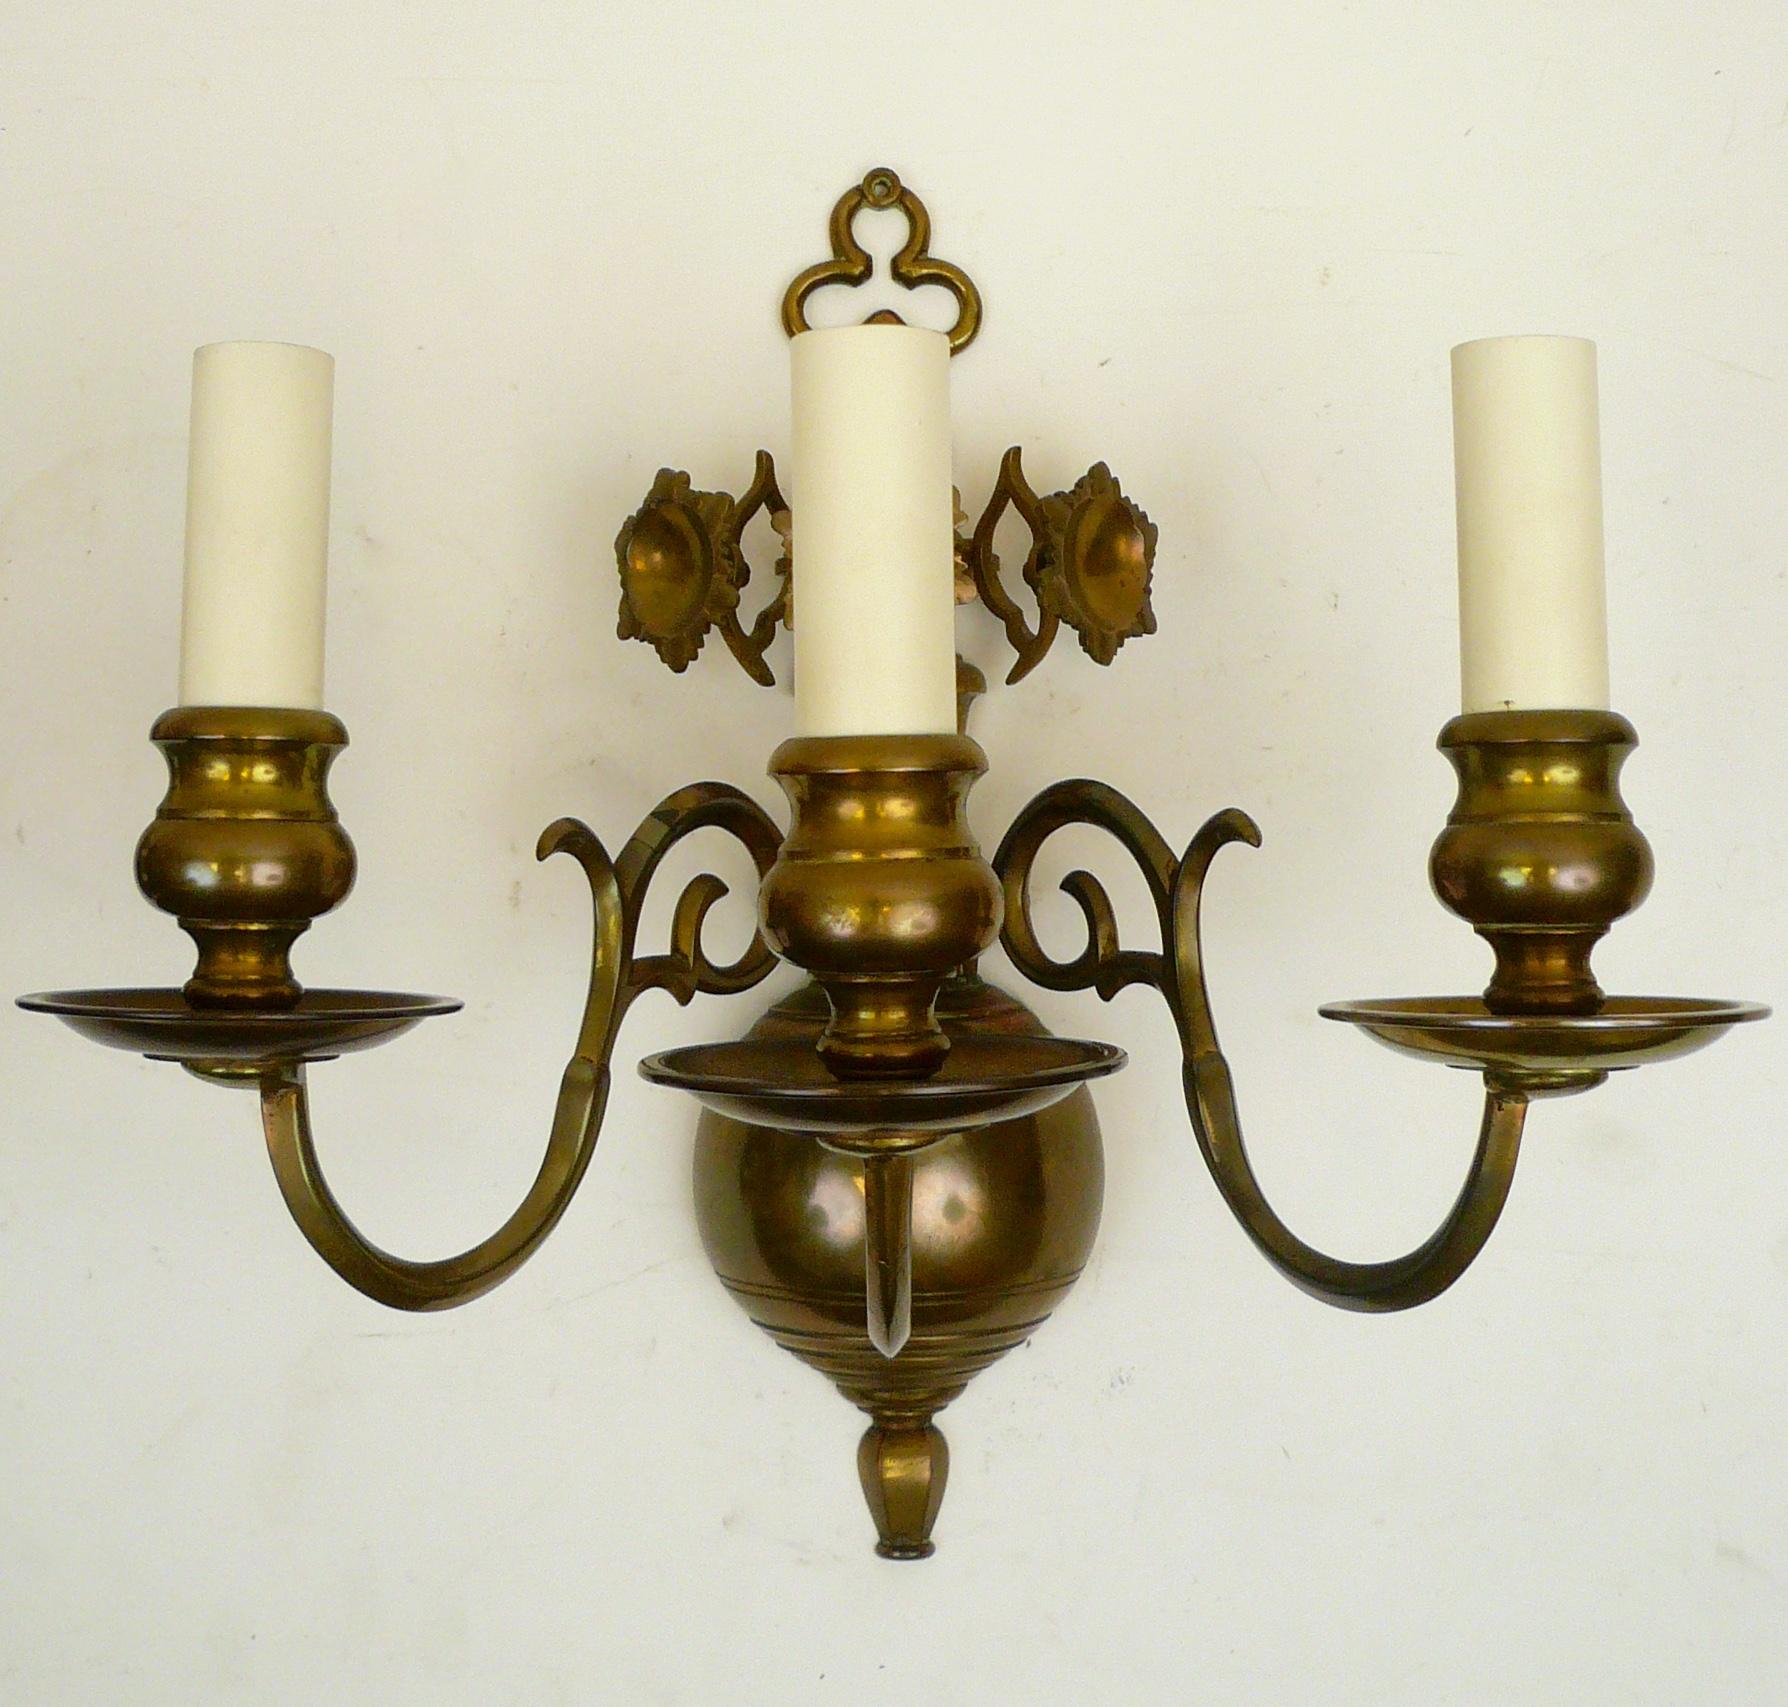 This handmade set of four 17th century Baroque style sconces have scrolled arms and floral form reflectors. They were originally purchased from Edward F. Caldwell & Company for a Tudor style Pittsburgh mansion.